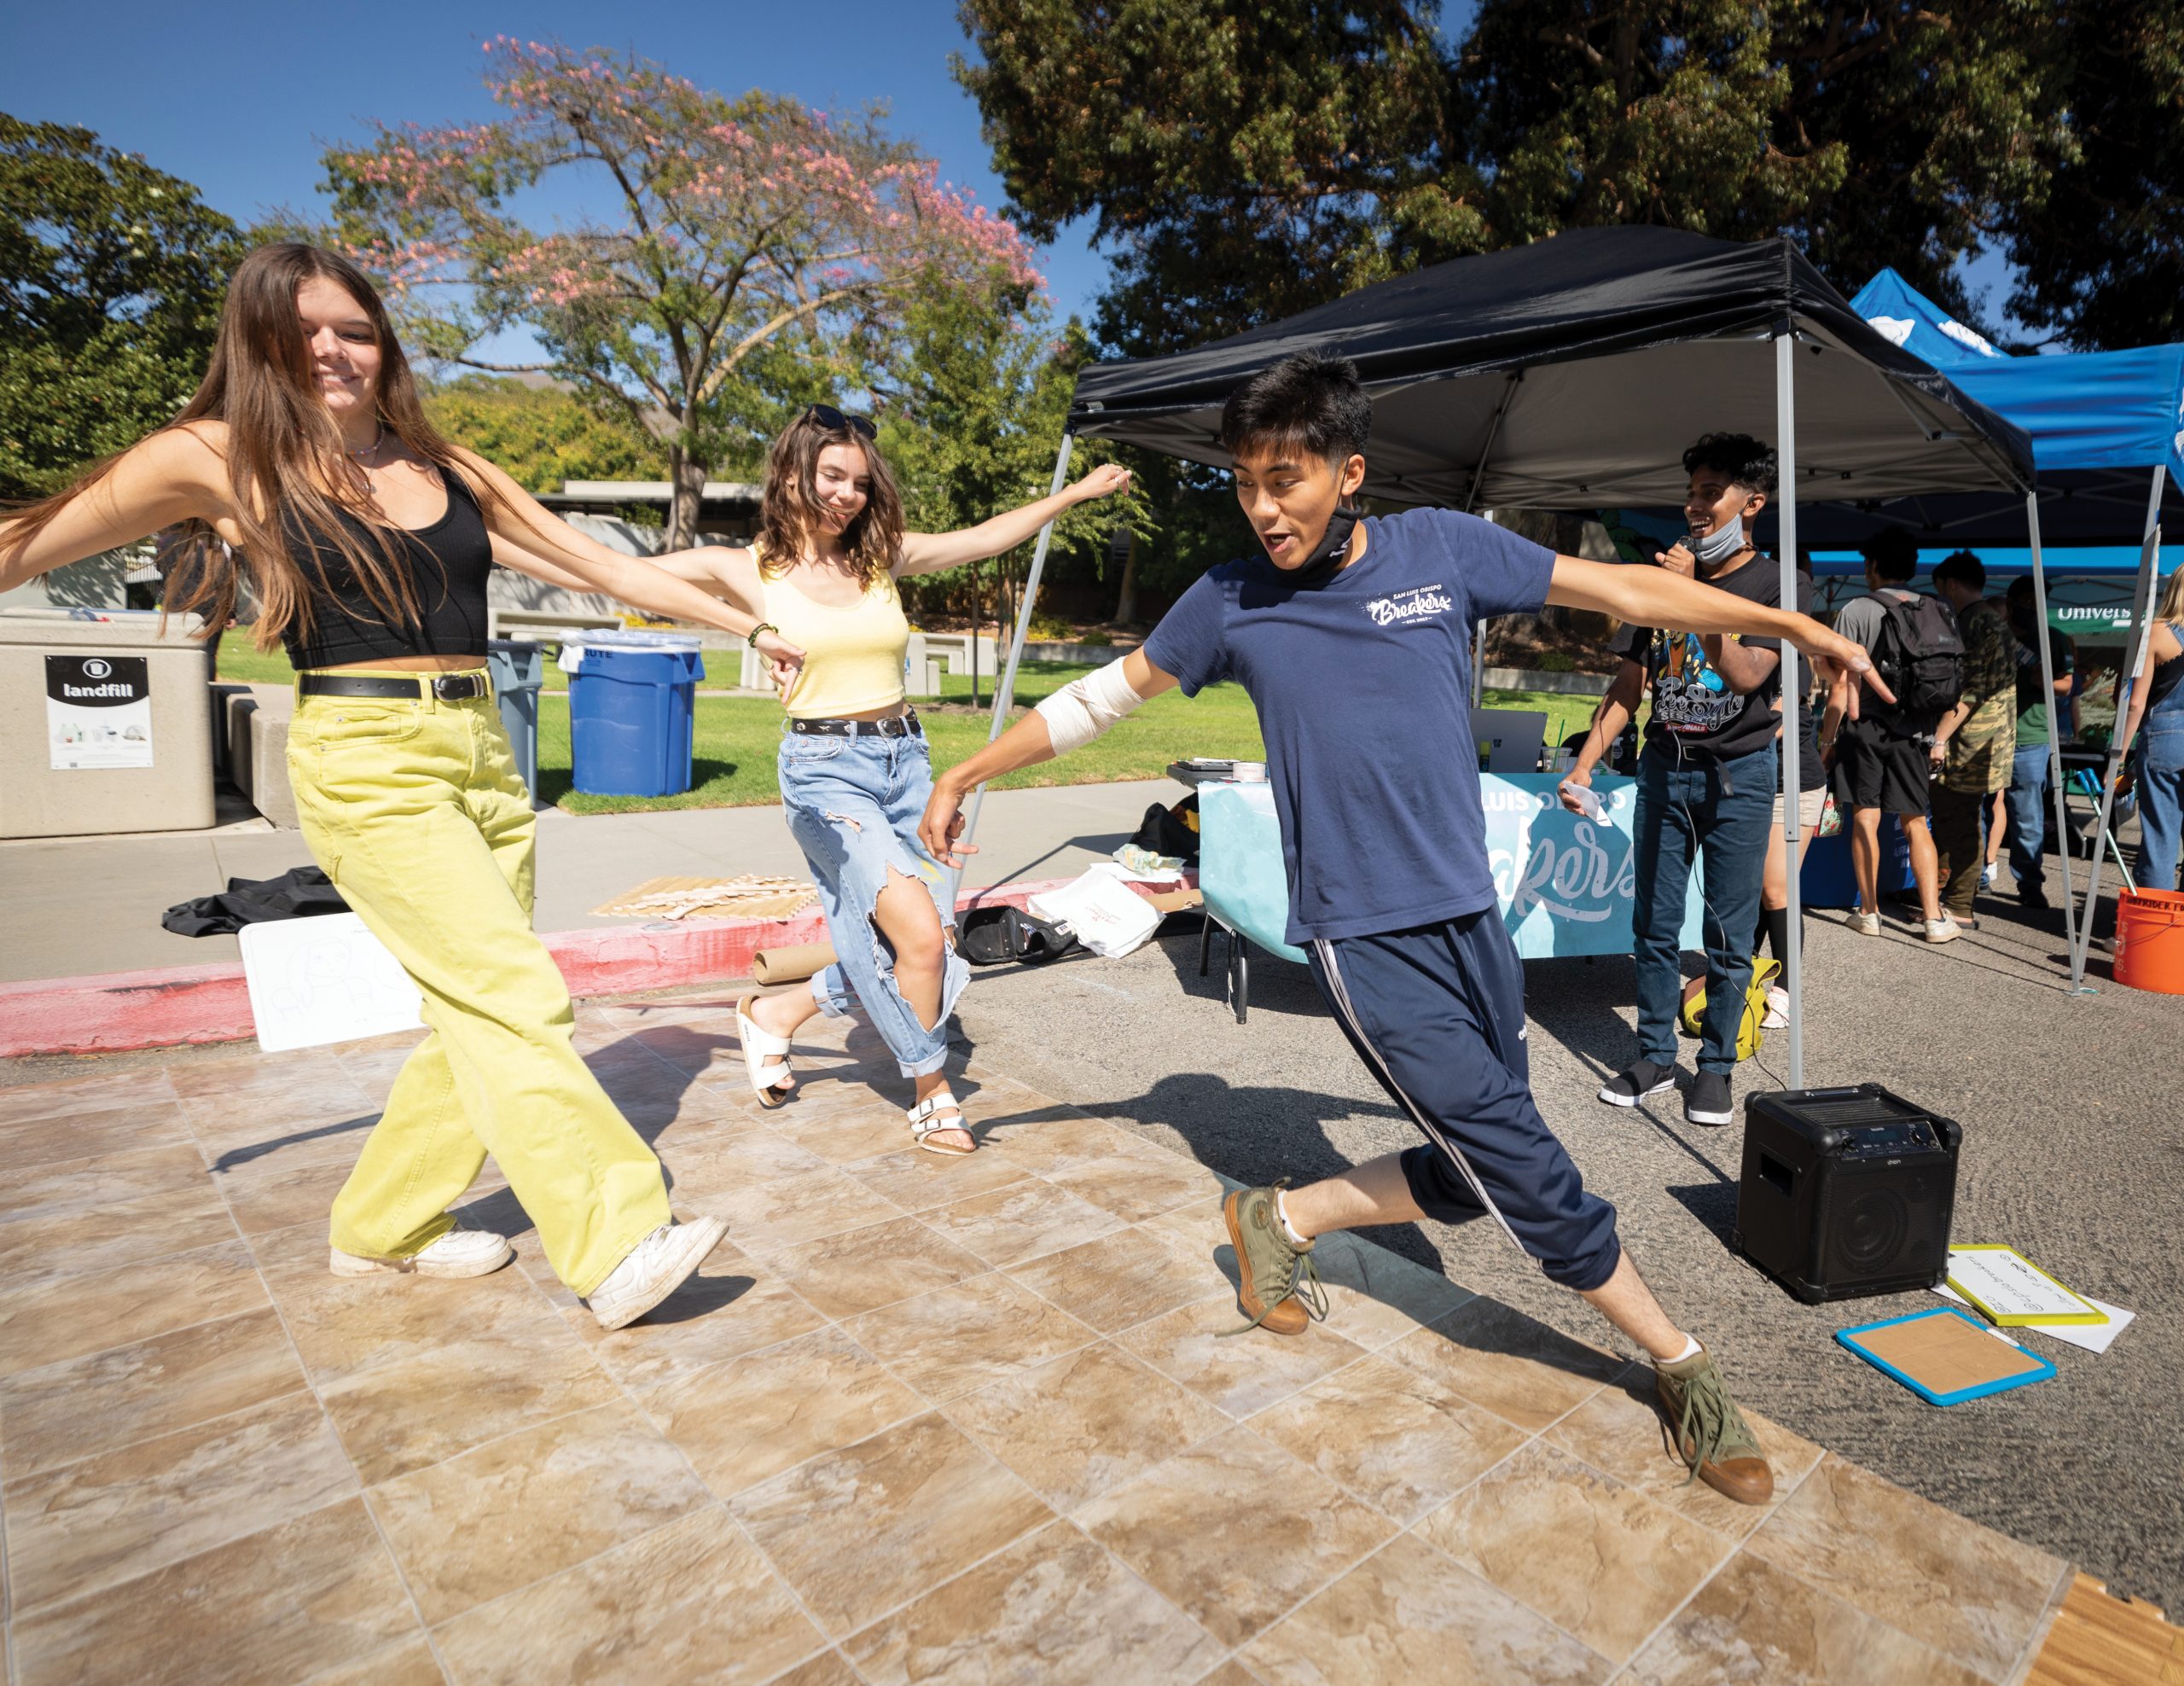 In a parking lot surrounded by pop tent booths, a young man leads two young women in a synchronized breakdance move on a large sheet of linoleum